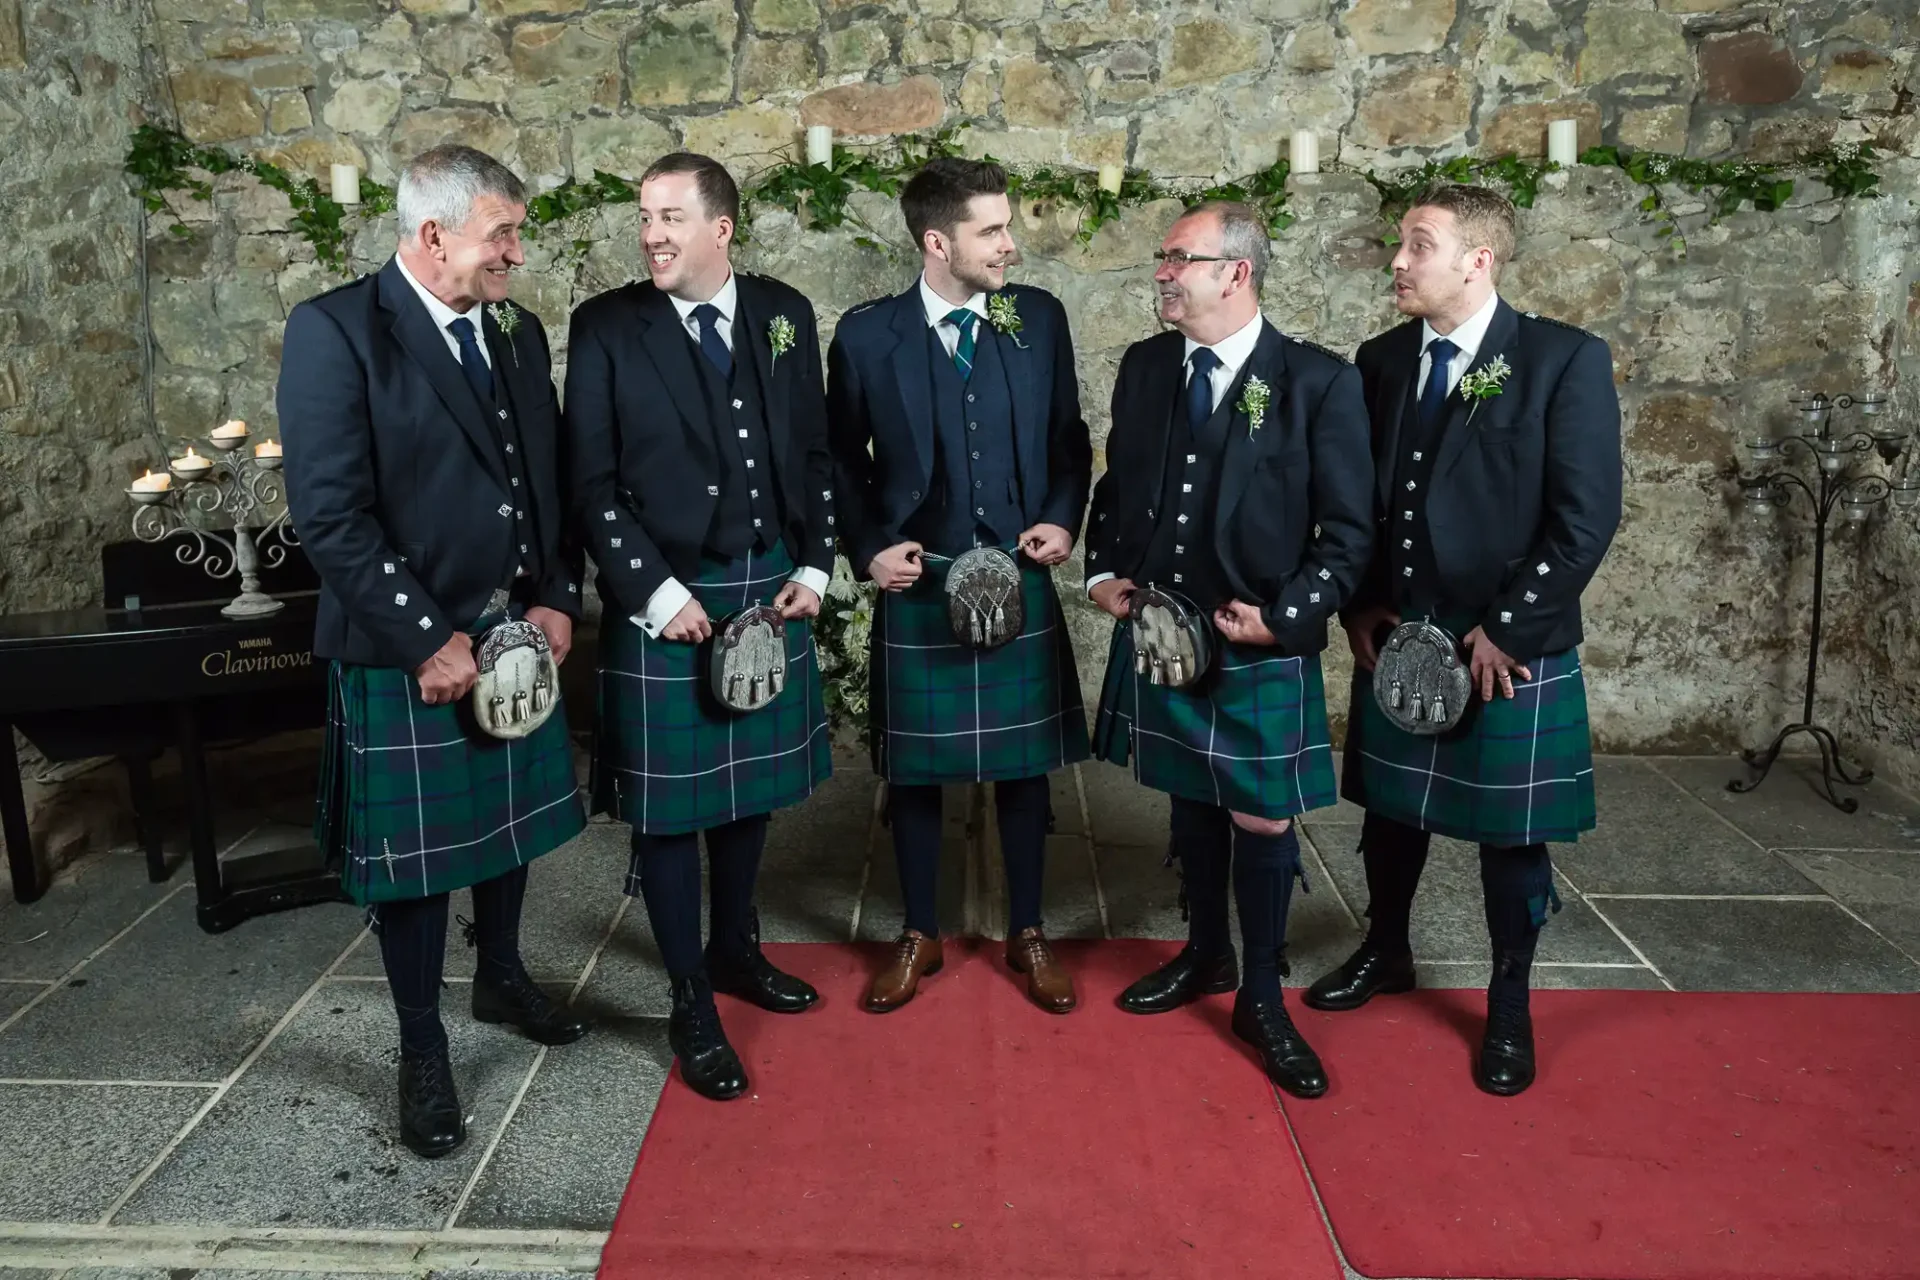 Five men in traditional scottish kilts and jackets stand on a red carpet against a stone wall, talking and smiling at a formal event.